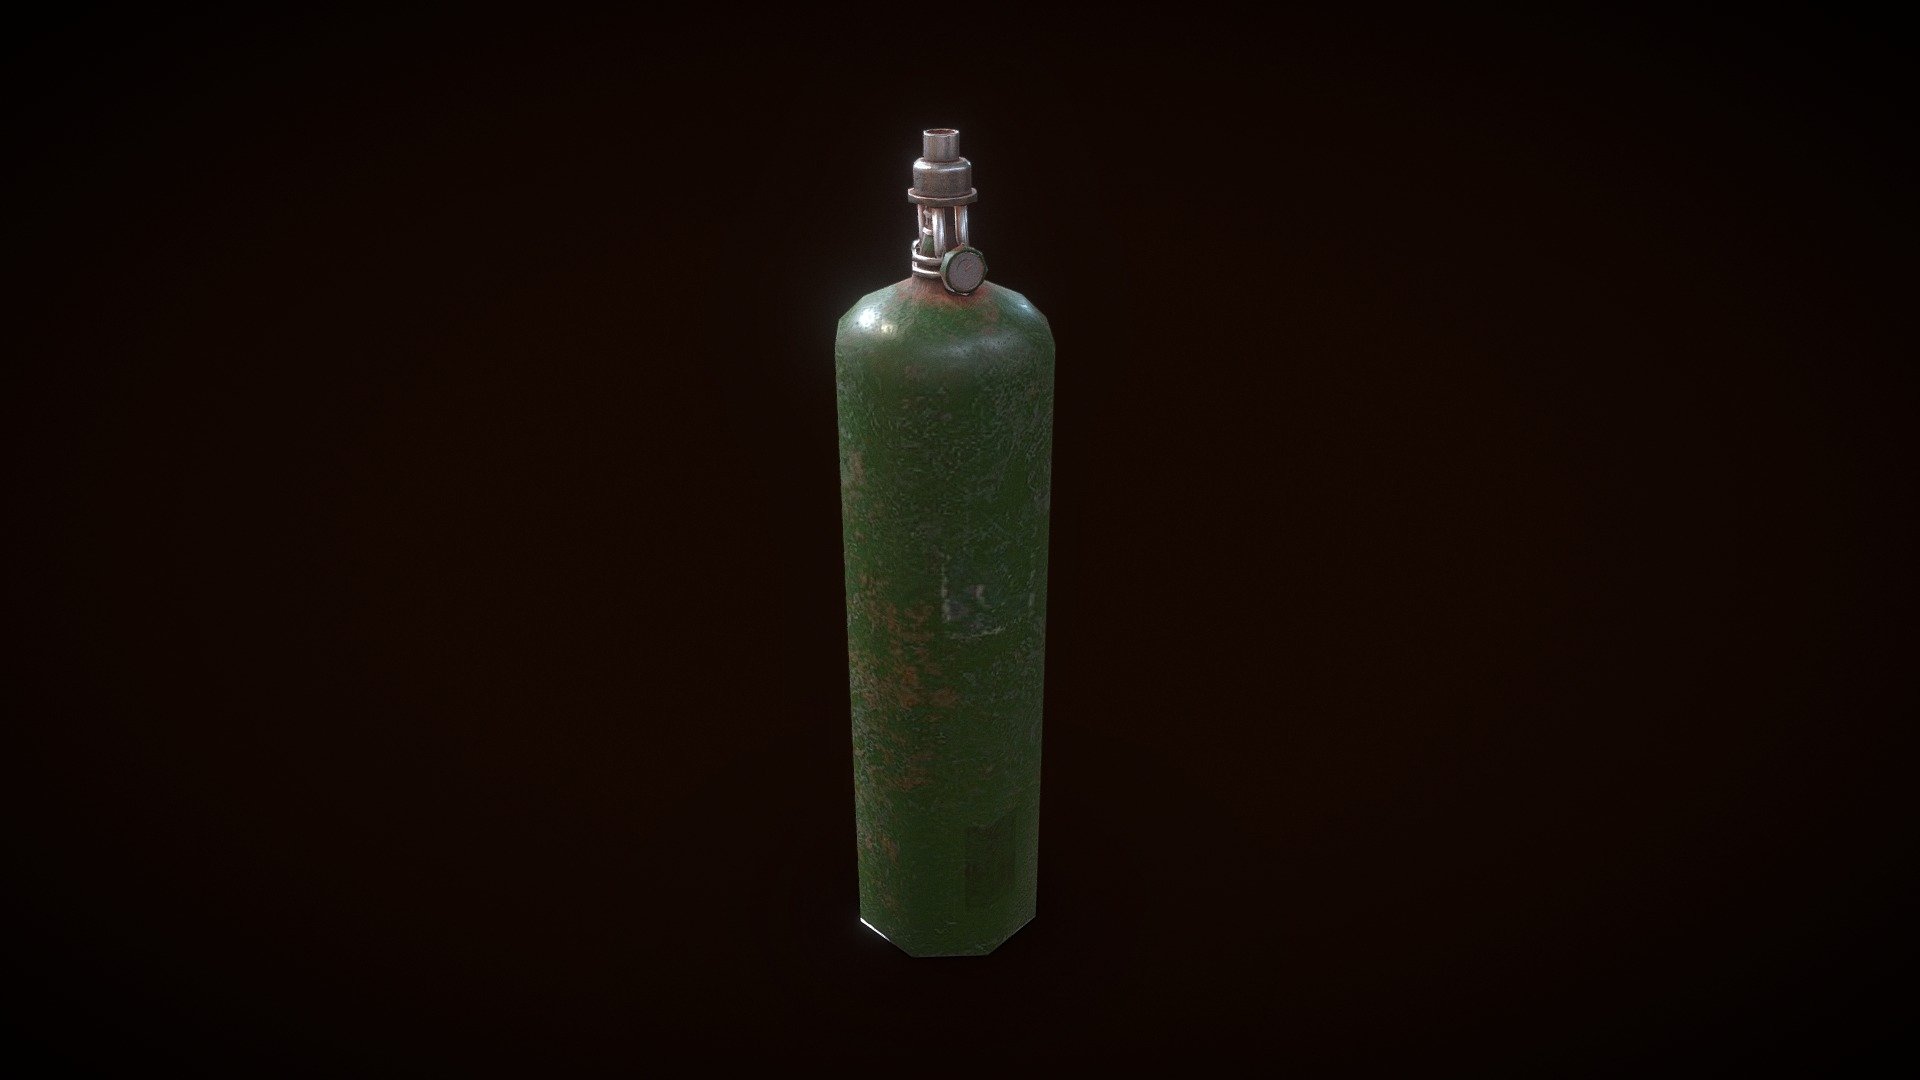 Old asset prop made for a school project. High Poly model originally made back in 2020. More info here: https://www.artstation.com/artwork/18QPBX

Ths is the low poly I made in 2021 as a study 3d model